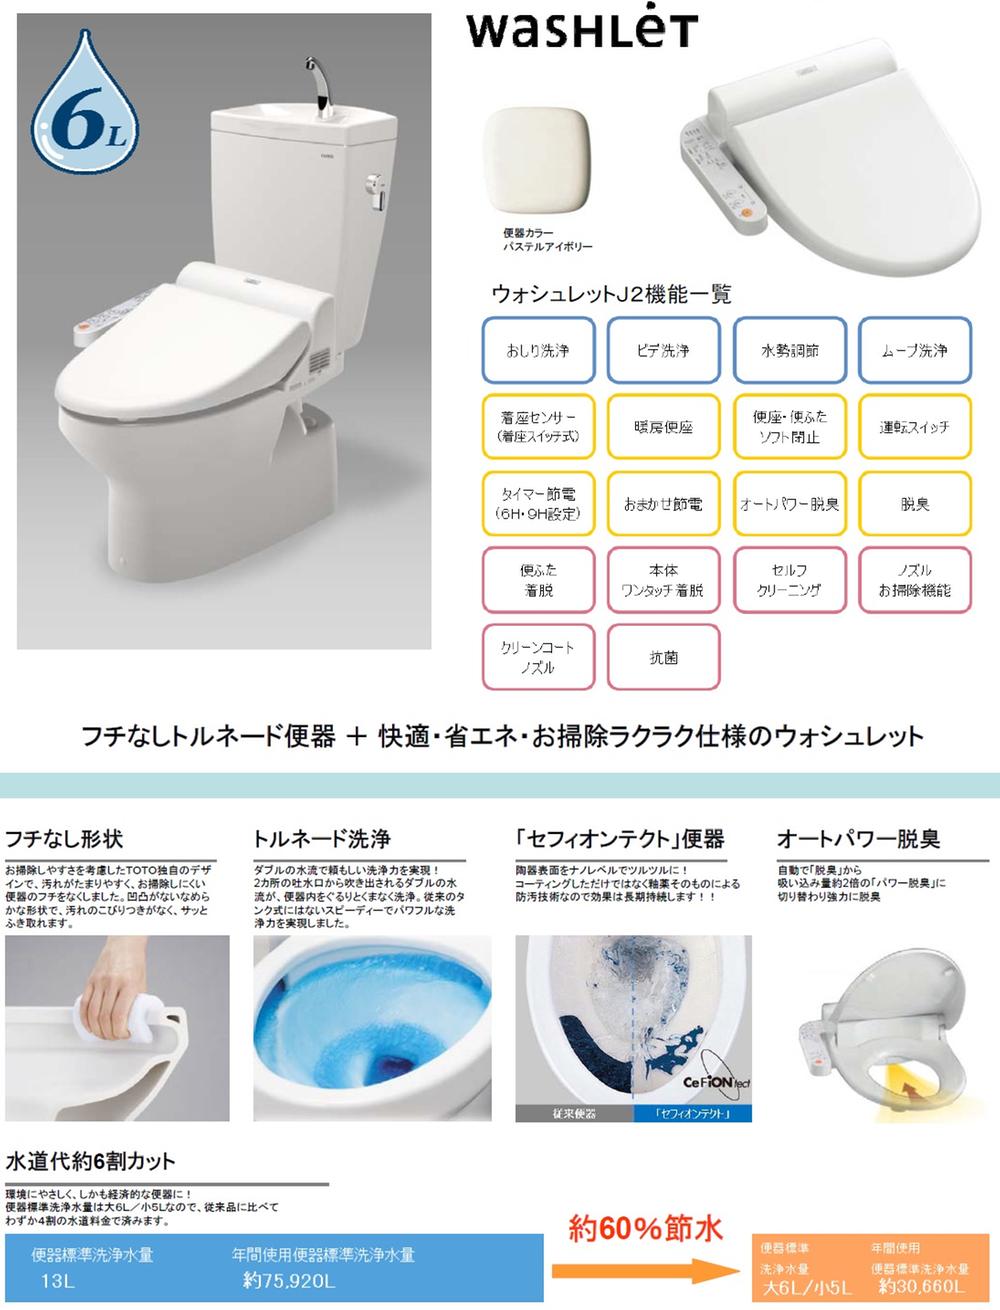 Toilet. Specifications schedule TOTO made Borderless shape in pursuit of clean ease. Tornado cleaning to wash all over the inside of the toilet bowl in the double of water flow. Automatically from "deodorizing", Switch to "power deodorizing" of the suction amount of about 2 times Ri strongly deodorizing. 